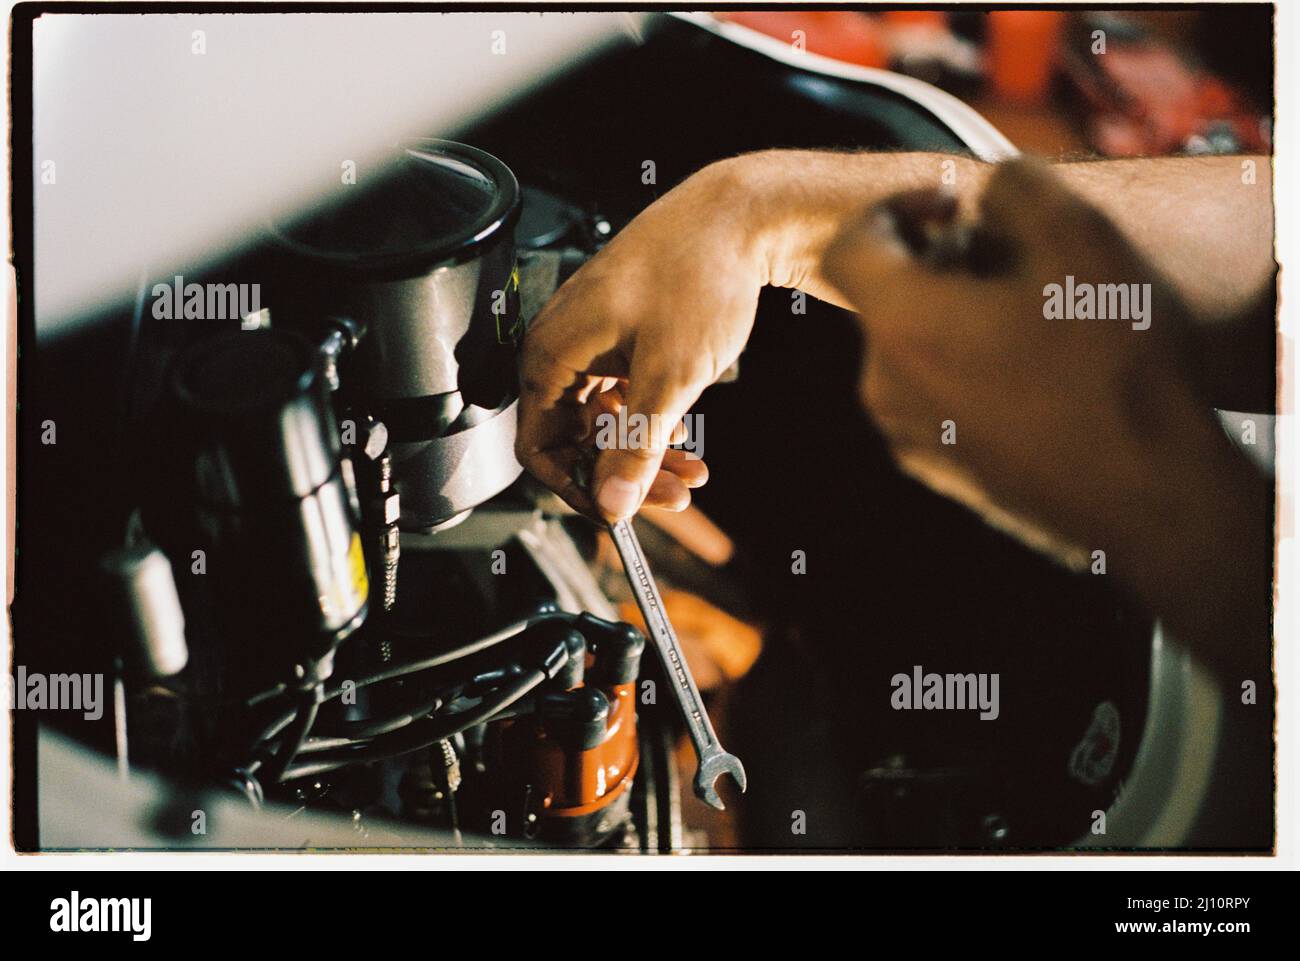 Mechanic hand using a wrench working on a vintage engine Stock Photo